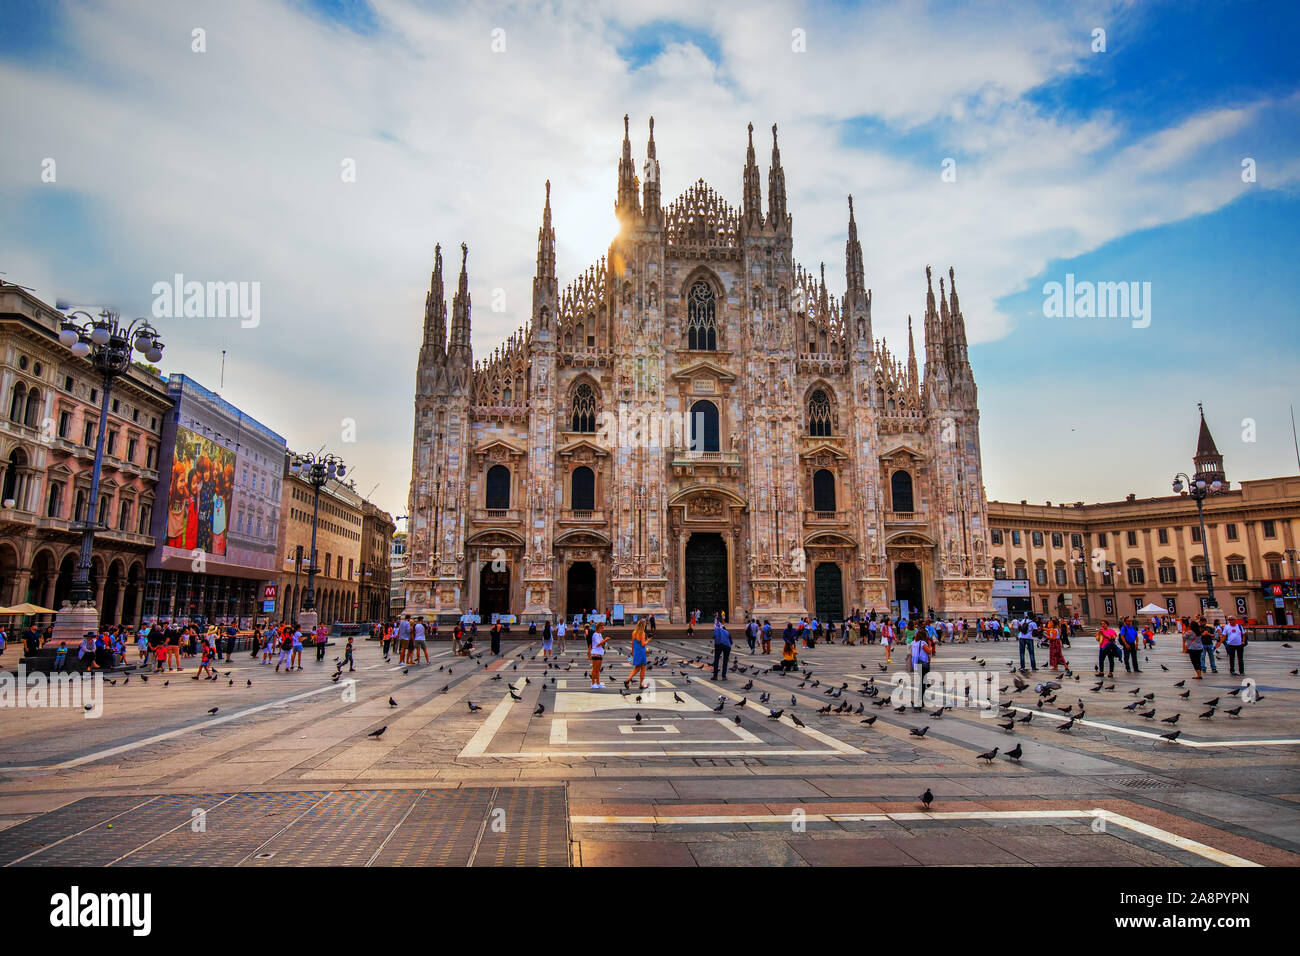 Cathedral Duomo di Milano and Vittorio Emanuele gallery in Square Piazza Duomo at sunrise, Milan, Italy, Europe. Stock Photo